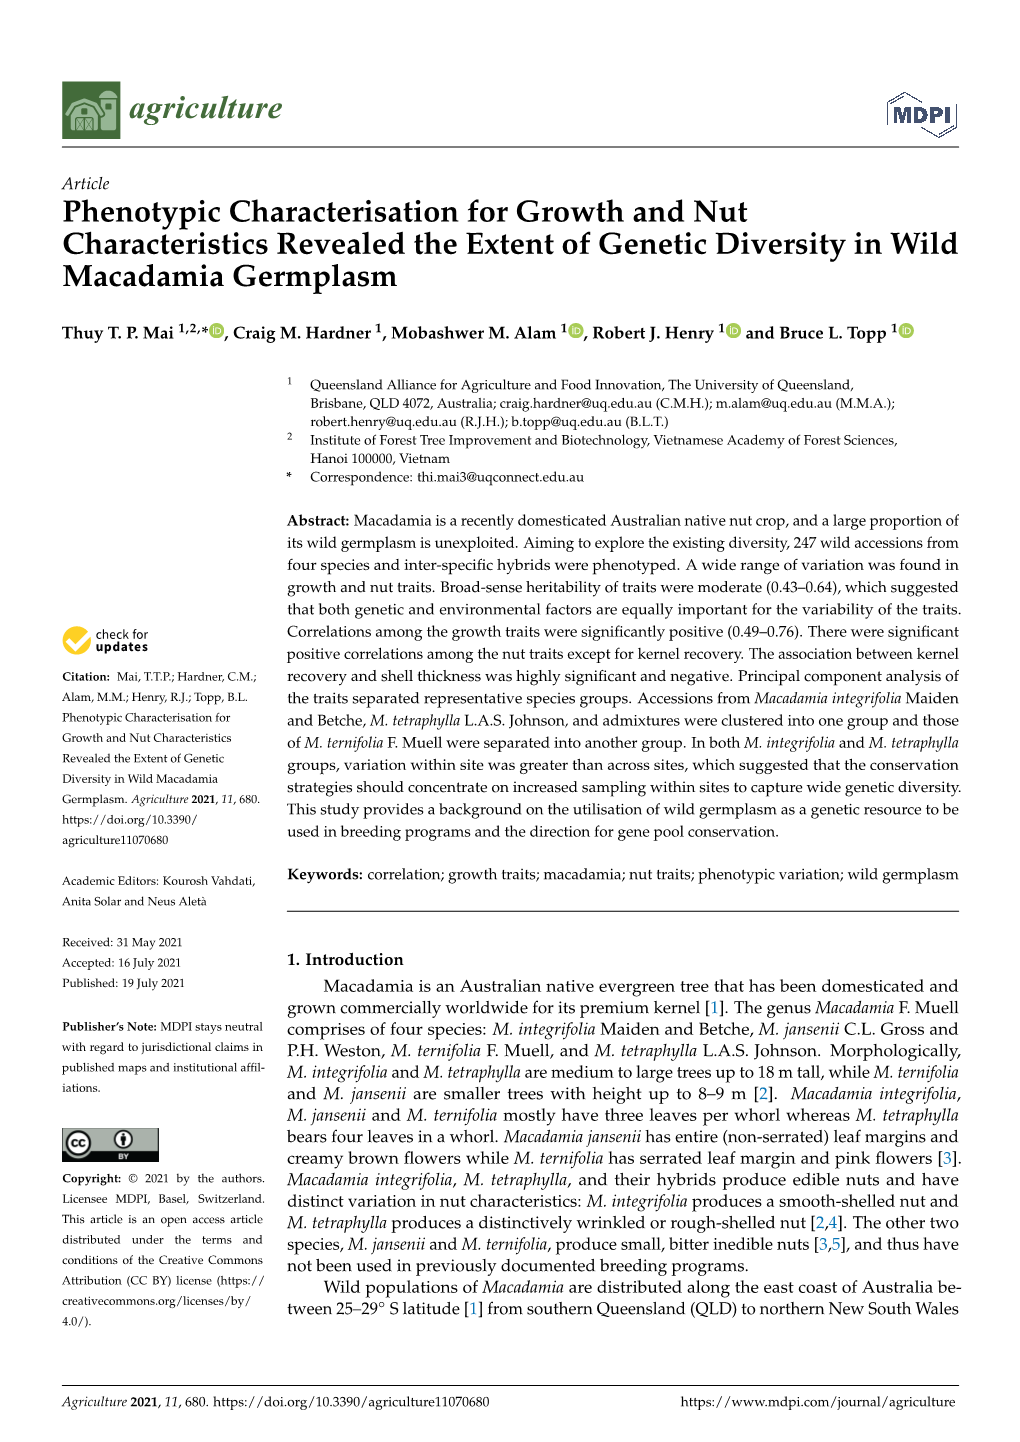 Phenotypic Characterisation for Growth and Nut Characteristics Revealed the Extent of Genetic Diversity in Wild Macadamia Germplasm